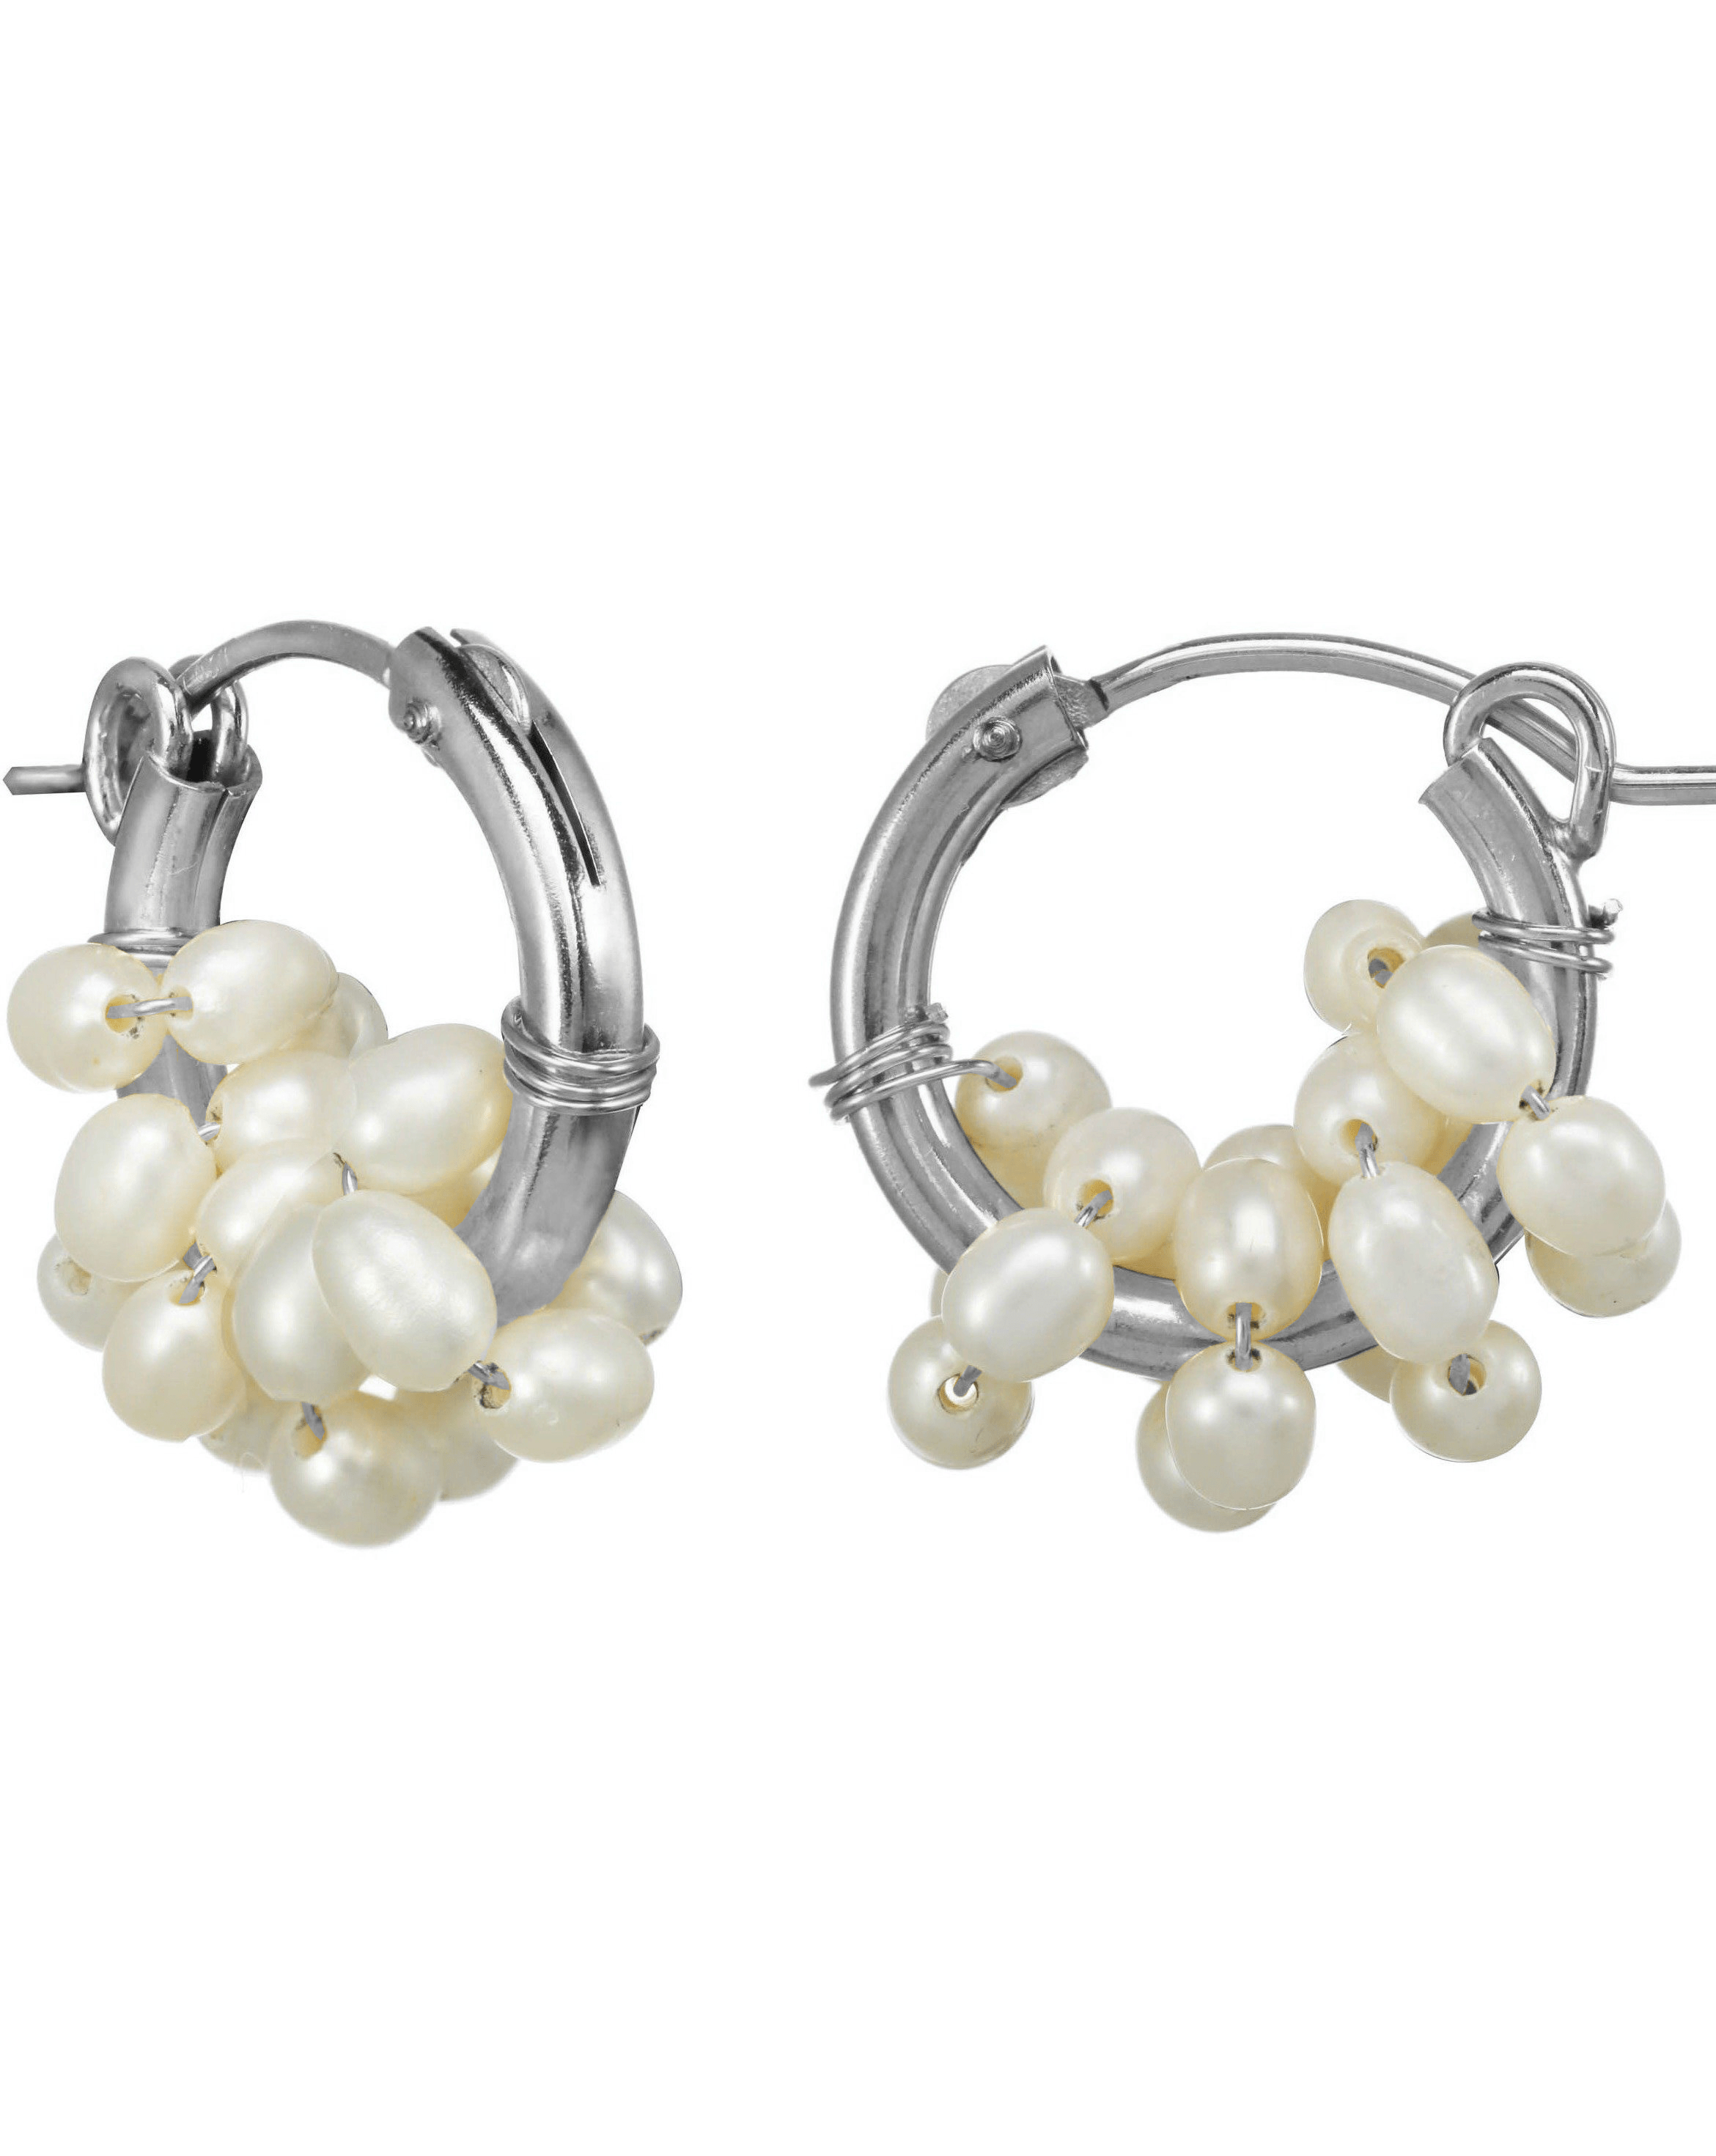 Areese Hoop Earrings by KOZAKH. 15mm hoop earrings with snap closure, crafted in Sterling Silver and embellished with 5mm white Rice Pearls.